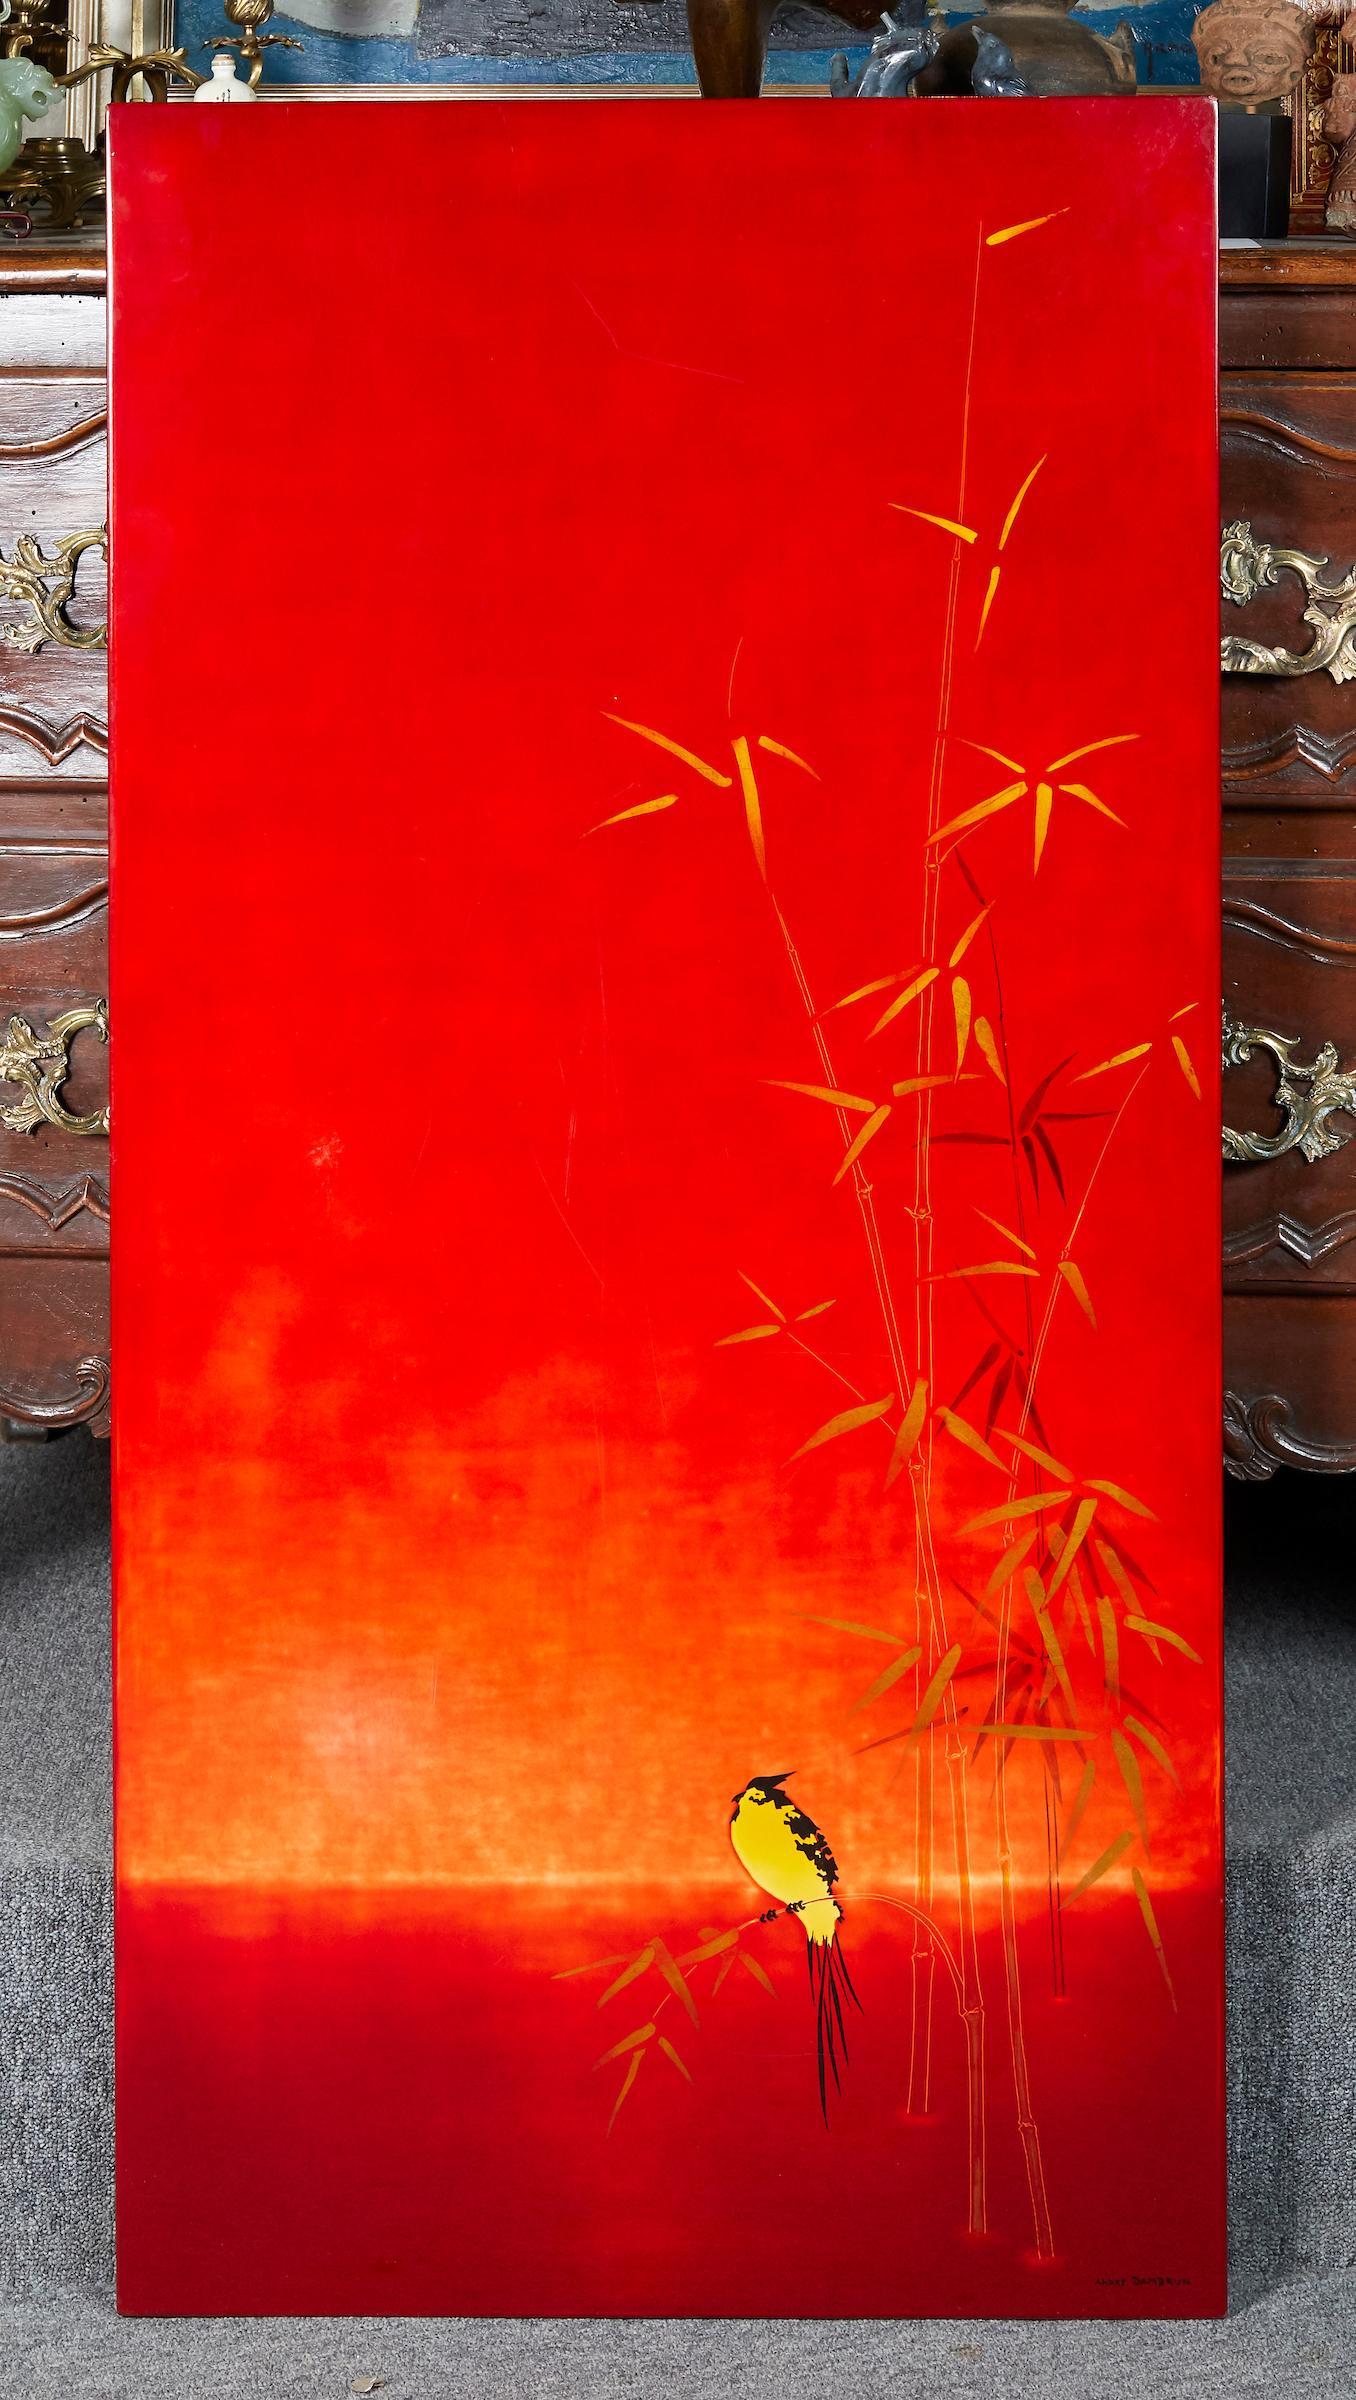 Polished red lacquered rectangular panel in the Japanesque style by Bernard Dunand.
Signed Andre Dambrun which was an acronym for Bernand Dunand.